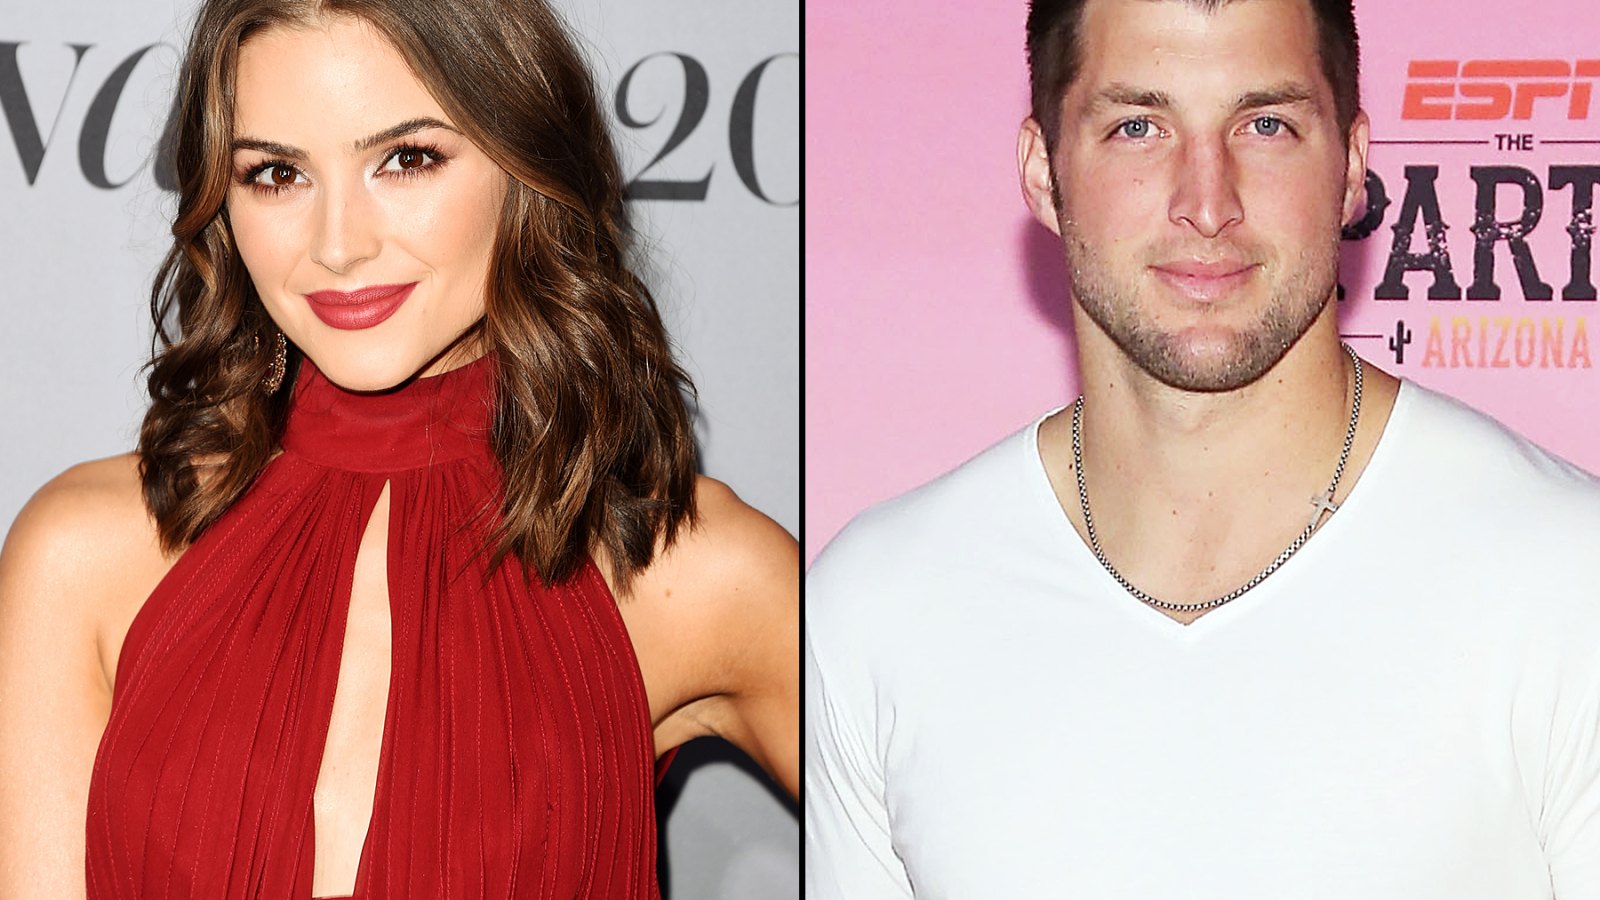 Olivia Culpo and Tim Tebow